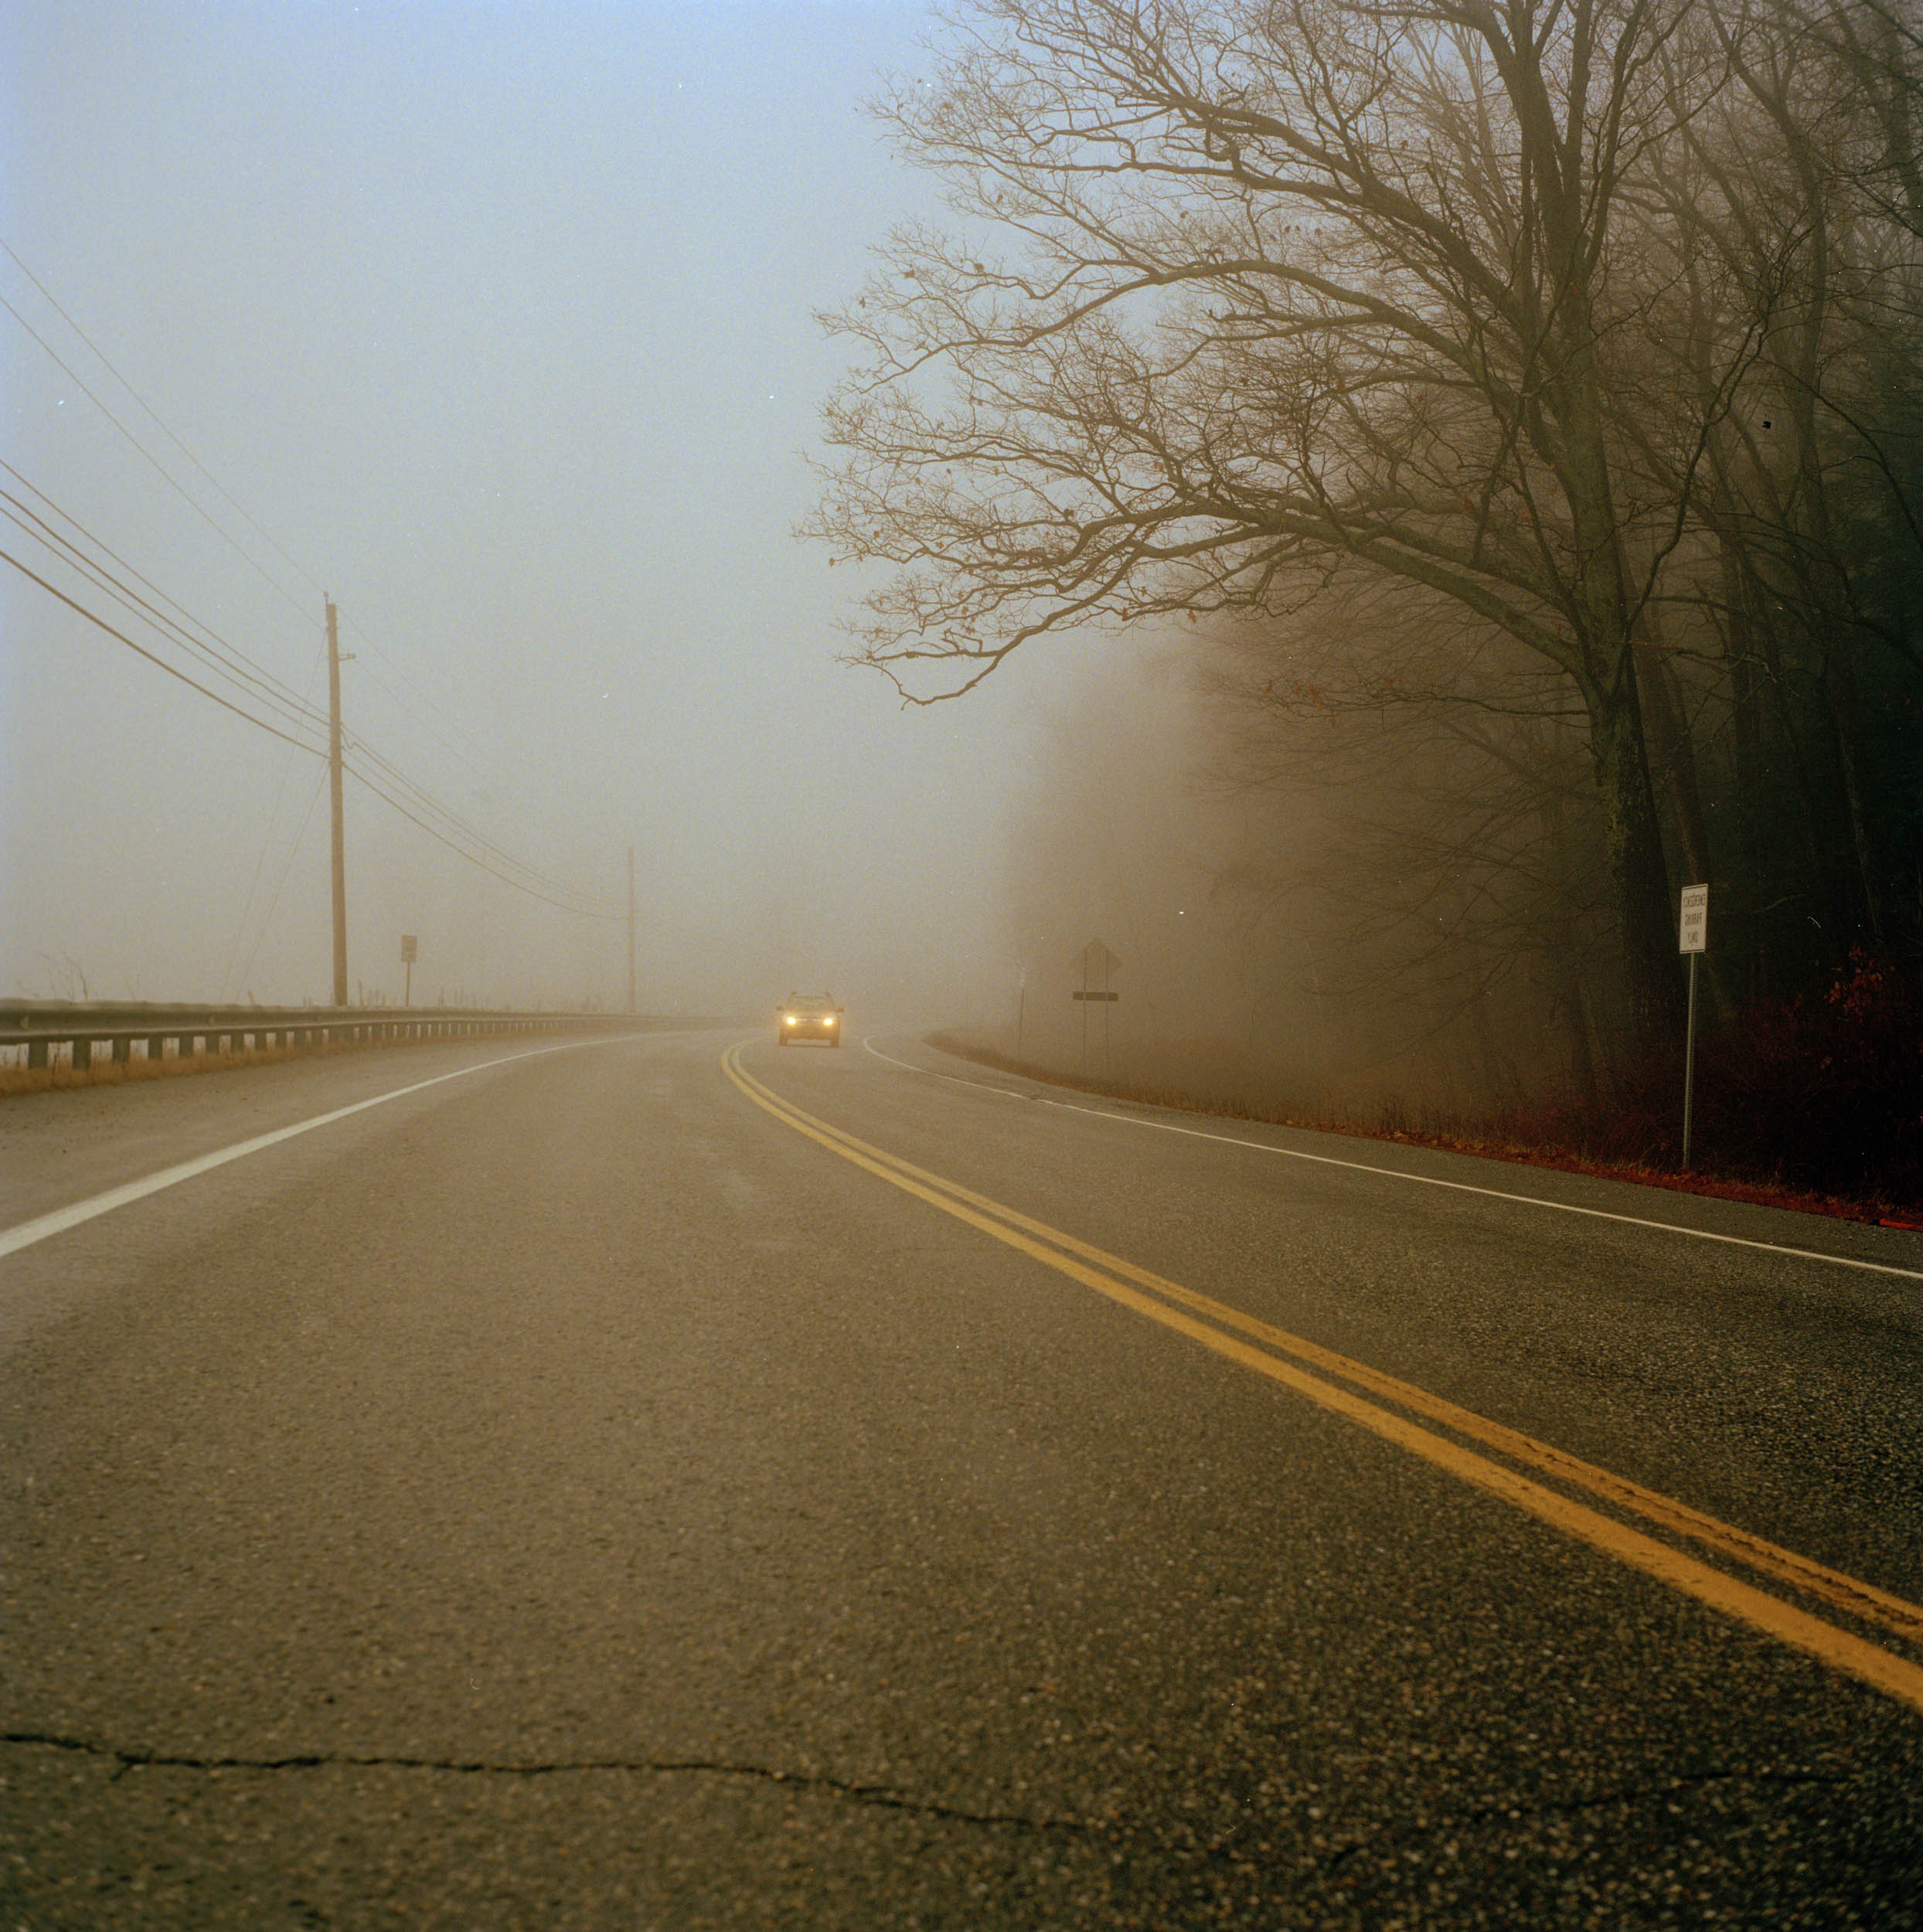 A-MISTY-HIGHWAY-SNAKES-THROUGH-MOUNTAINS-IN-VERMONT-US